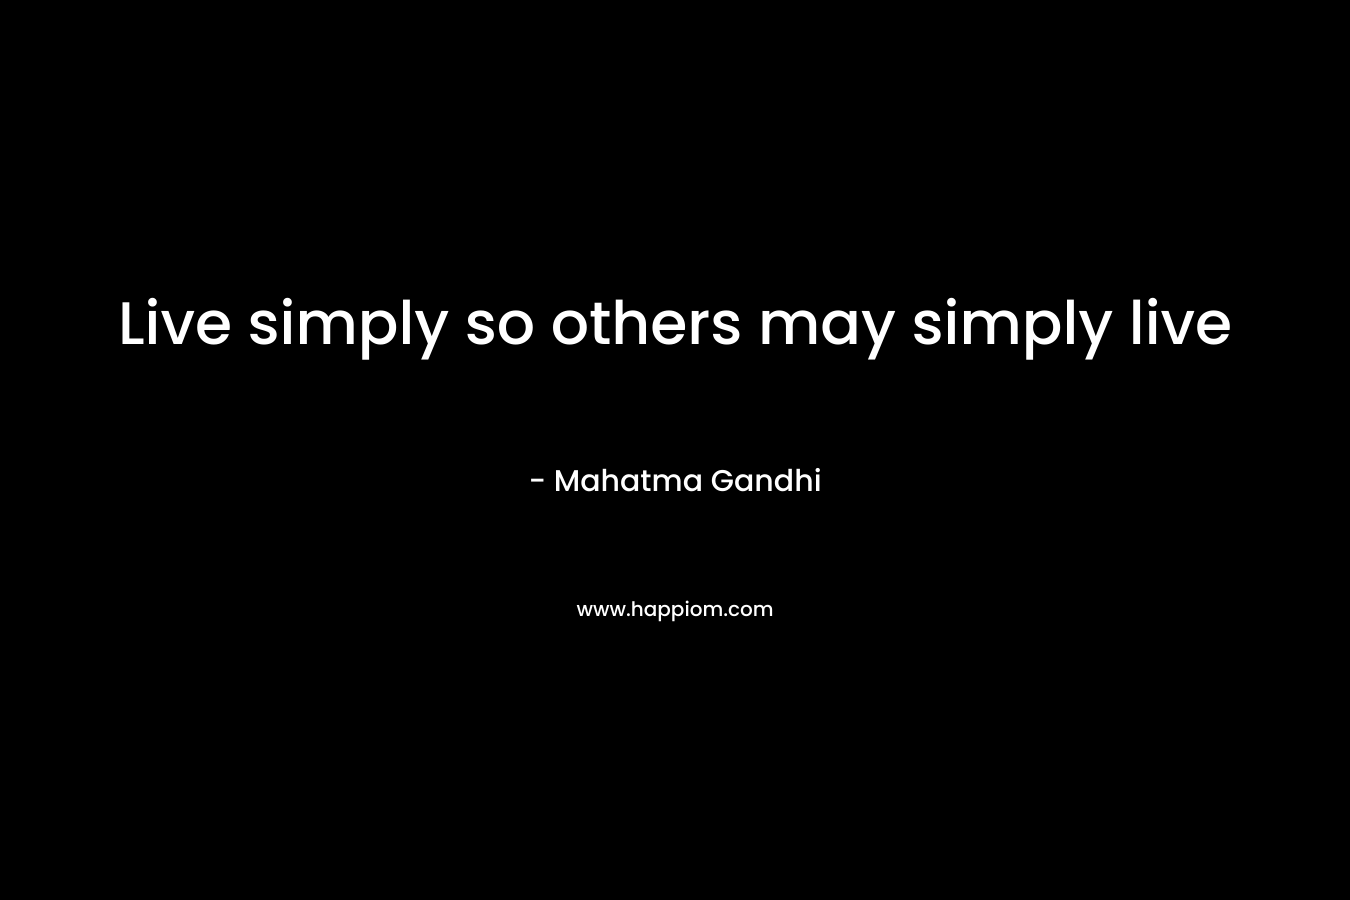 Live simply so others may simply live